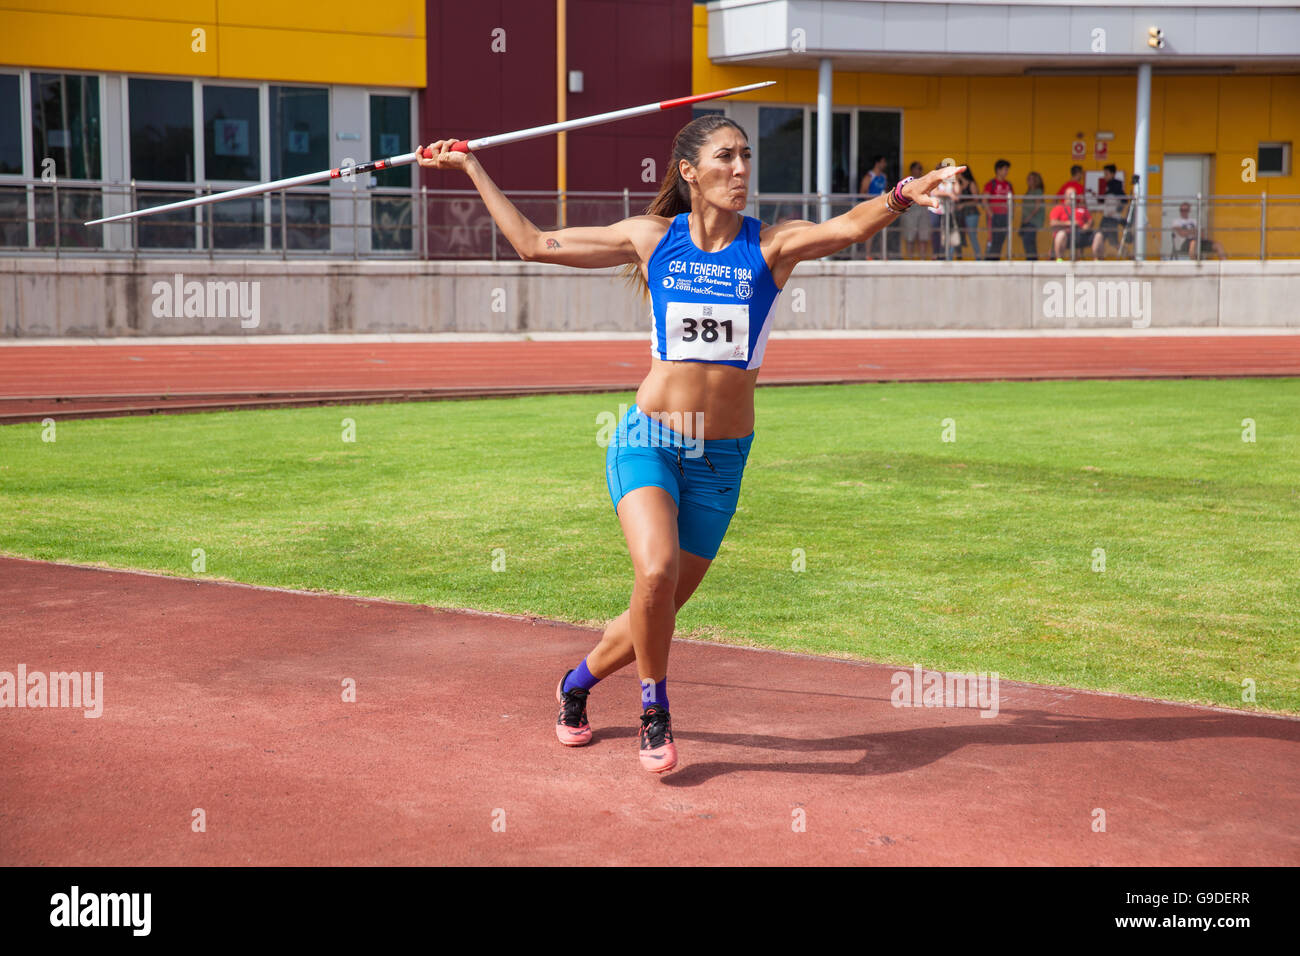 young woman throwing javelin on an athletic piste Stock Photo